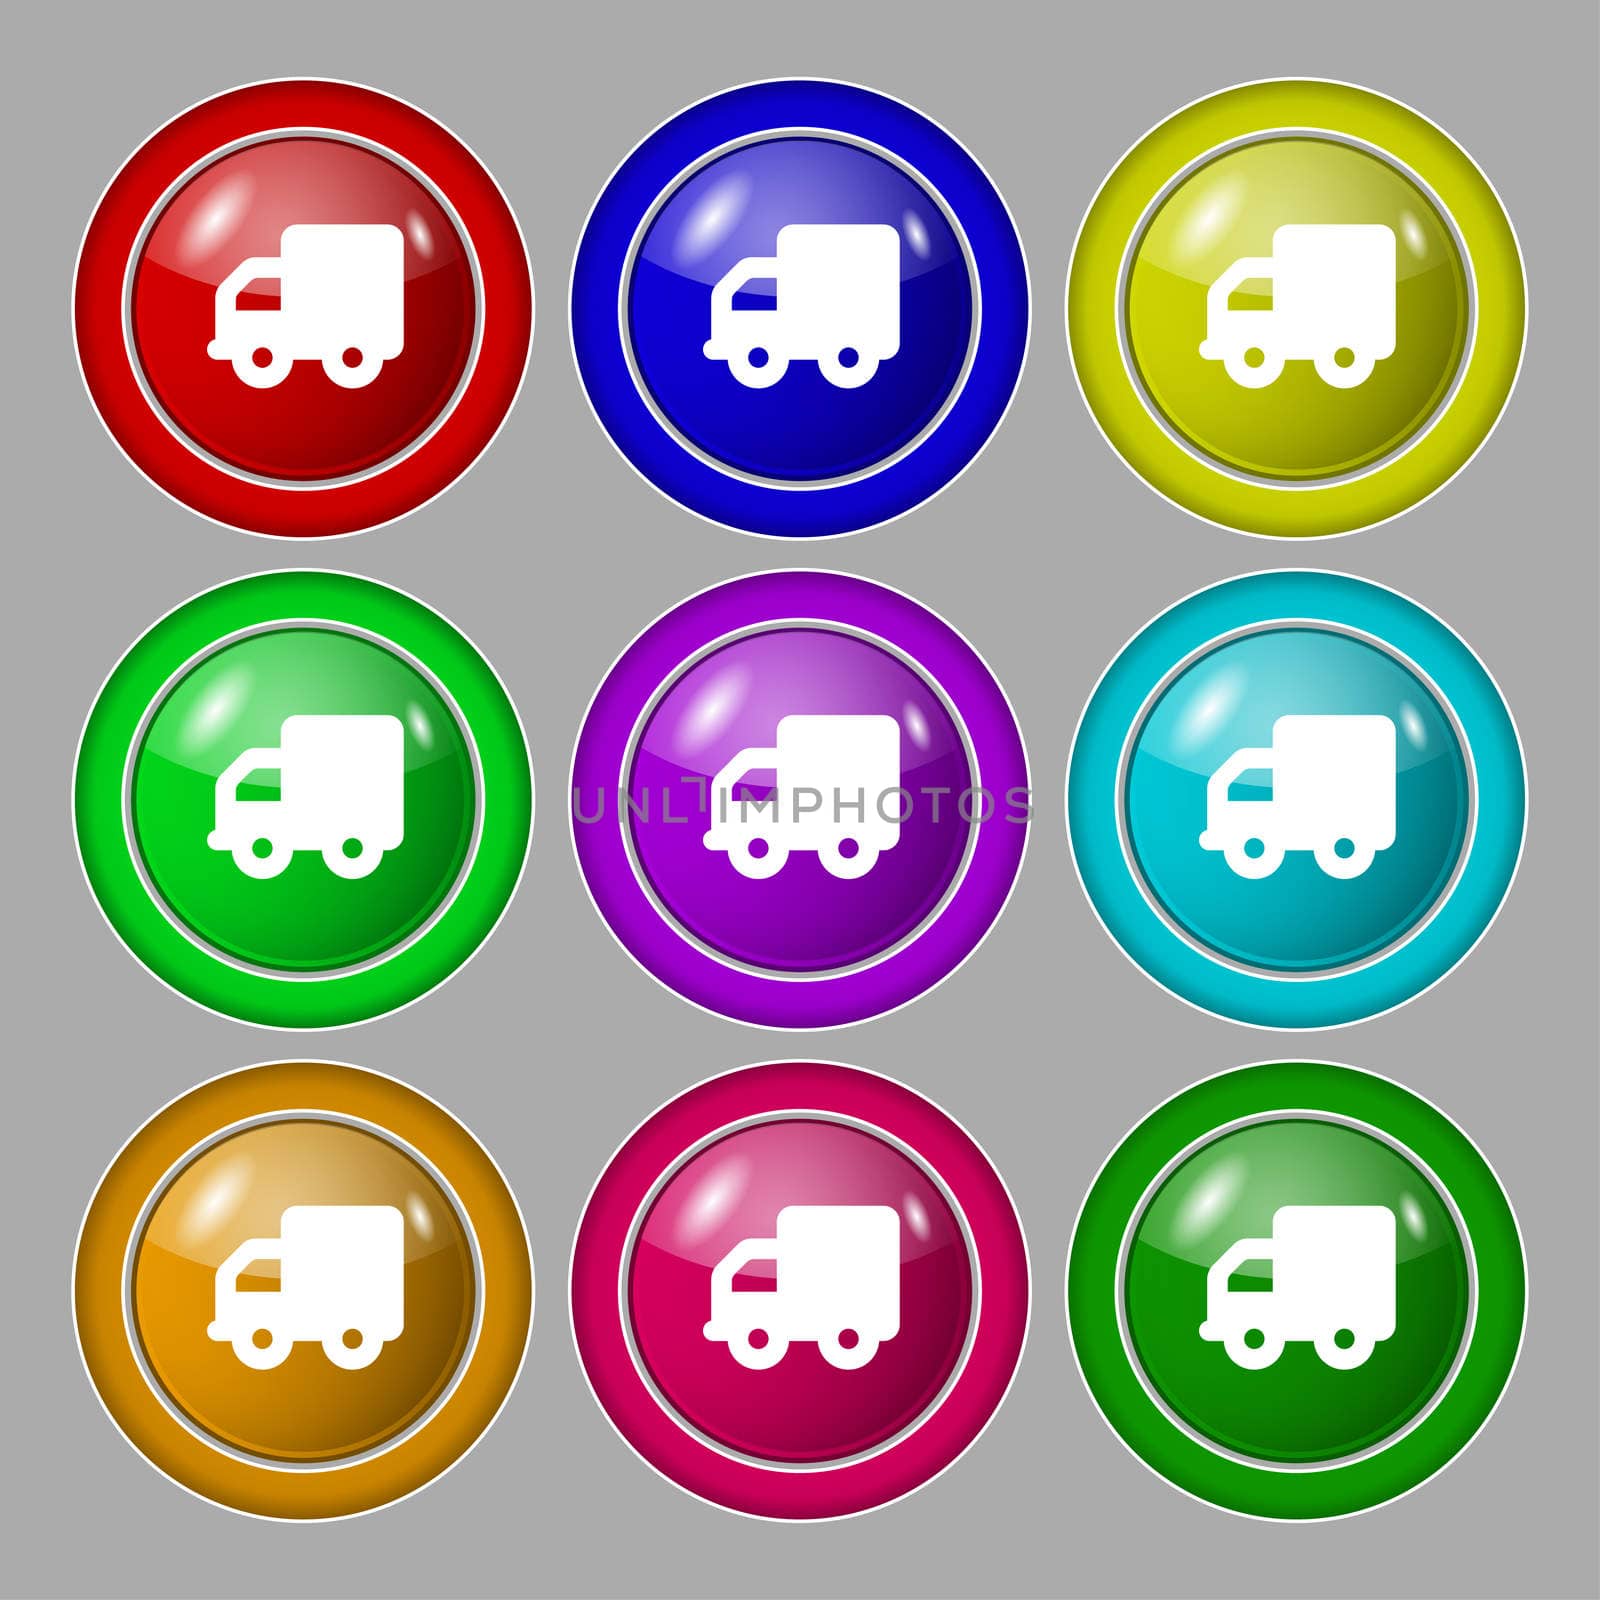 Delivery truck icon sign. symbol on nine round colourful buttons. illustration